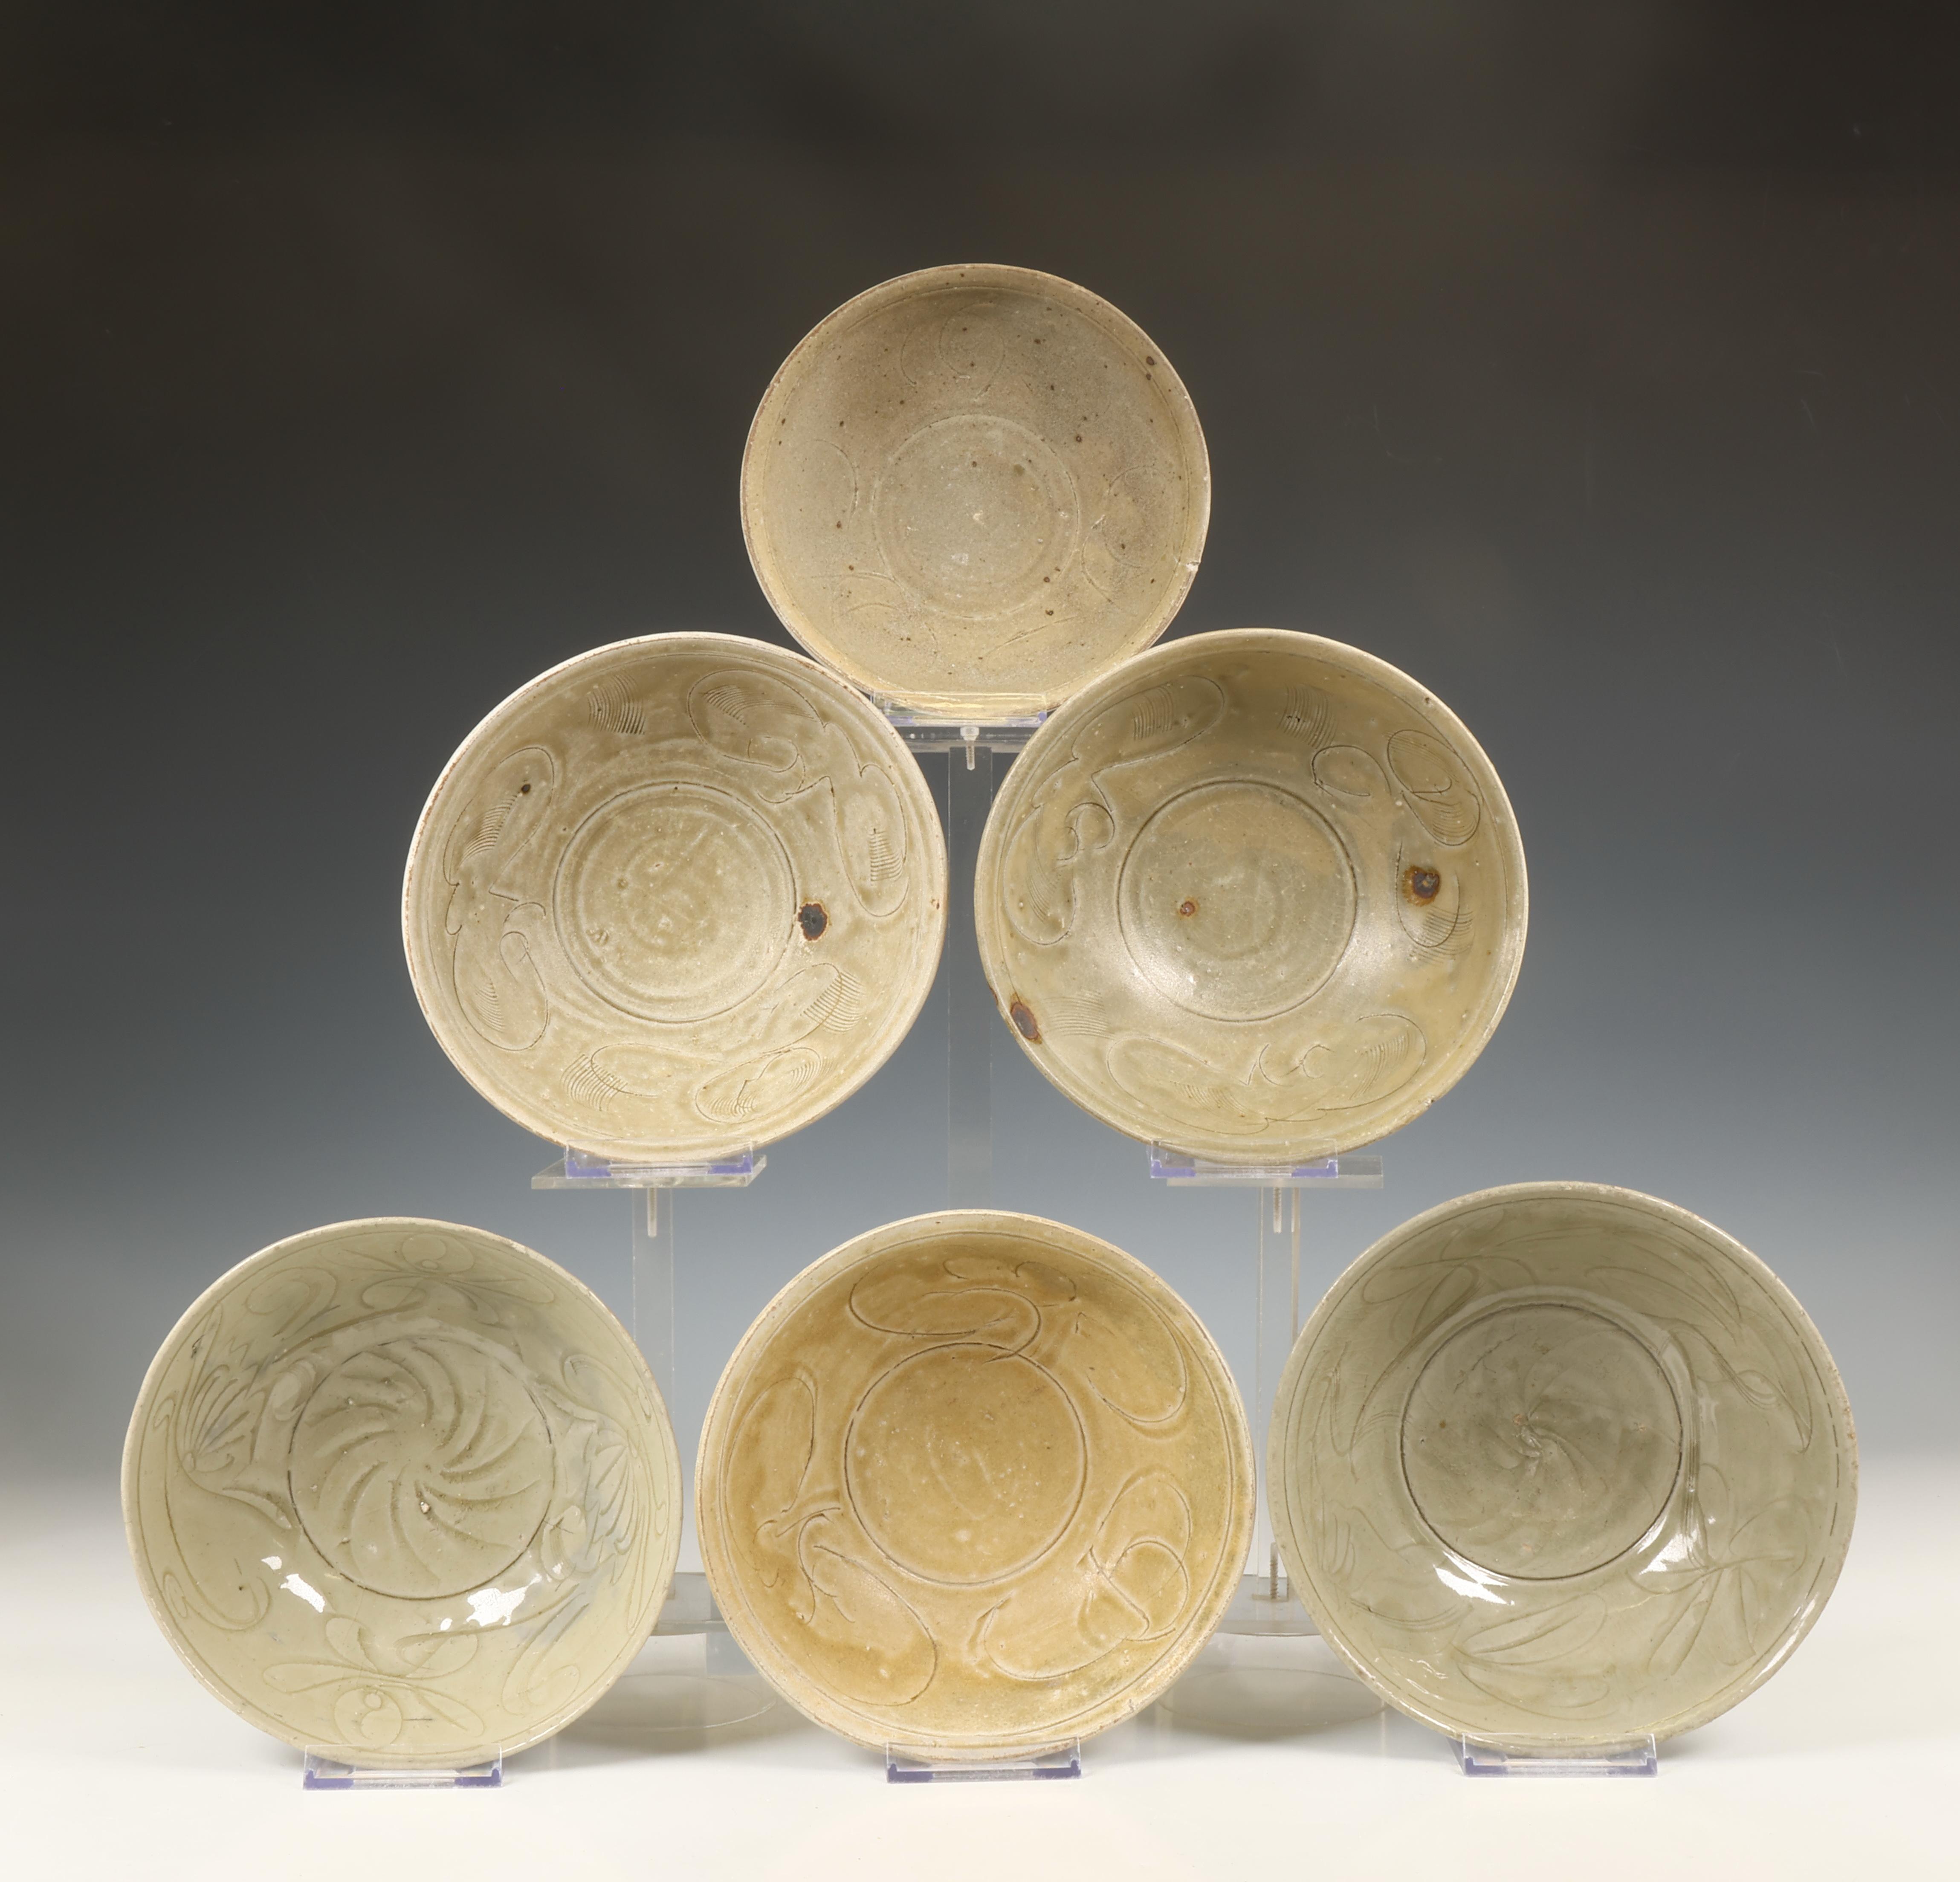 China, collection of eighteen celadon-glazed bowls, Northern Song dynasty, 10th-12th century, - Image 5 of 7